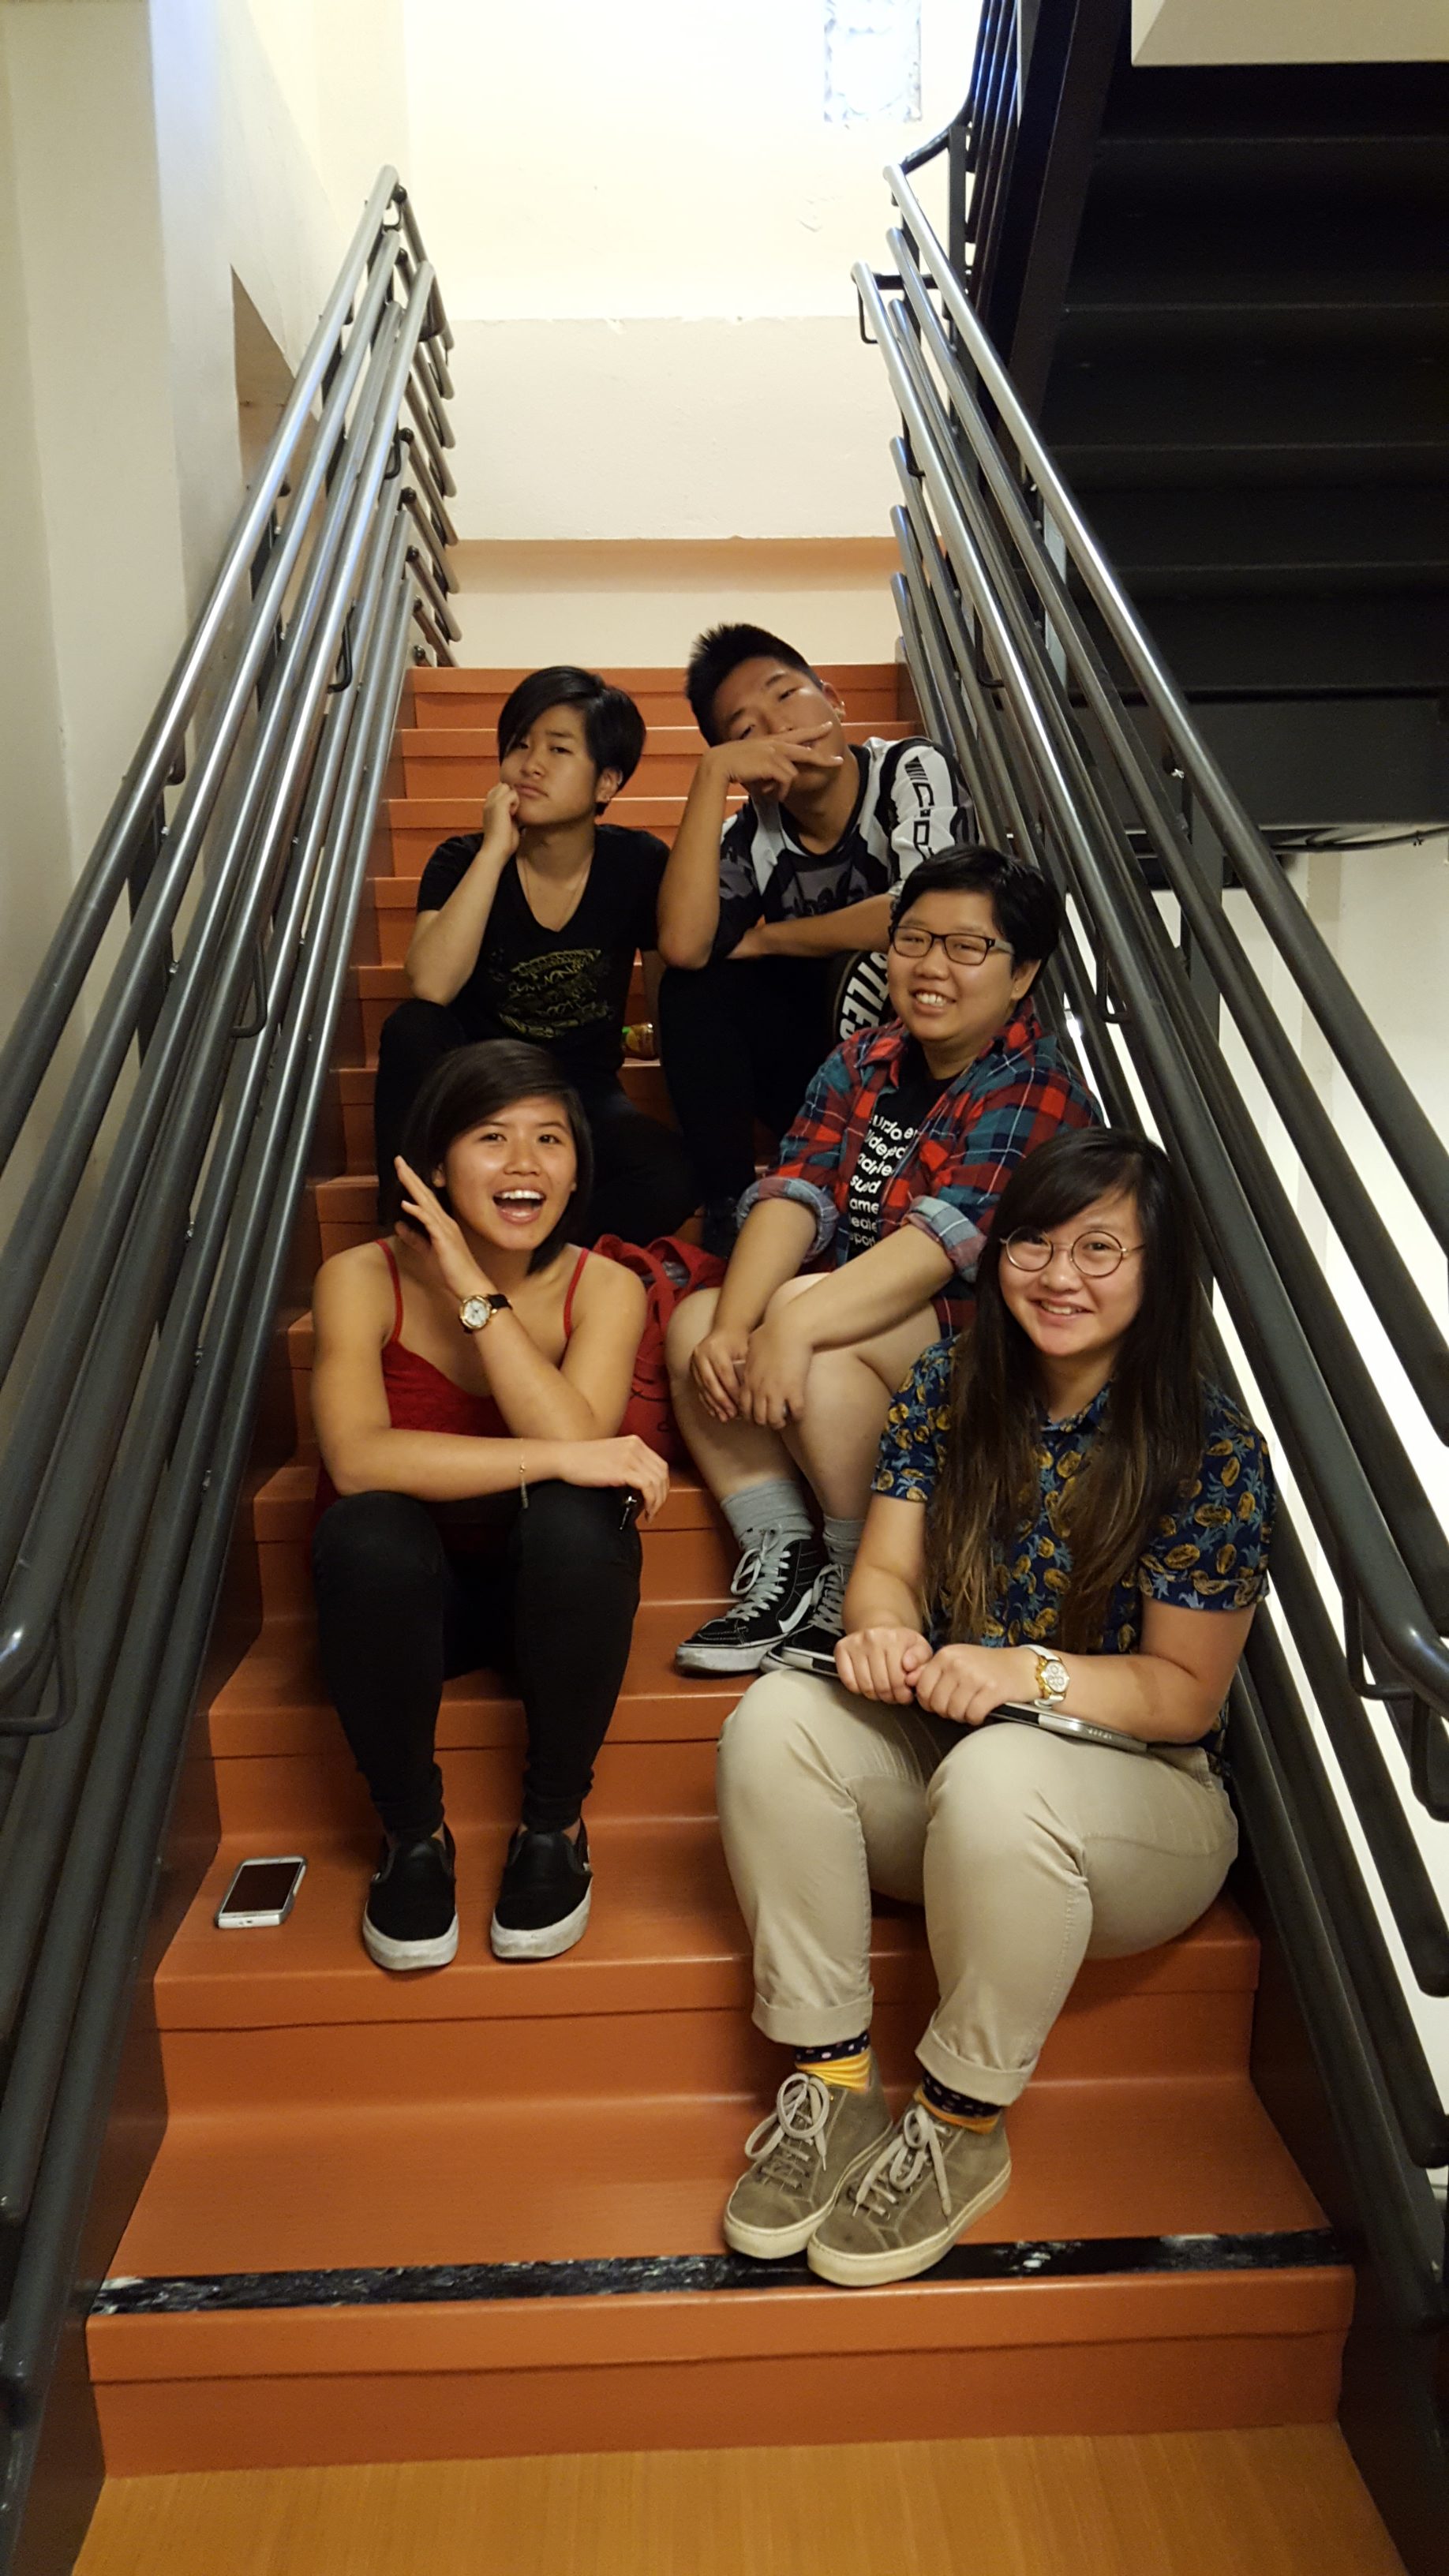 Image Description: Five APIENC Summer Interns sit on steps in a stairwell. They all make a range of silly, smiling, and serious faces to the camera. 